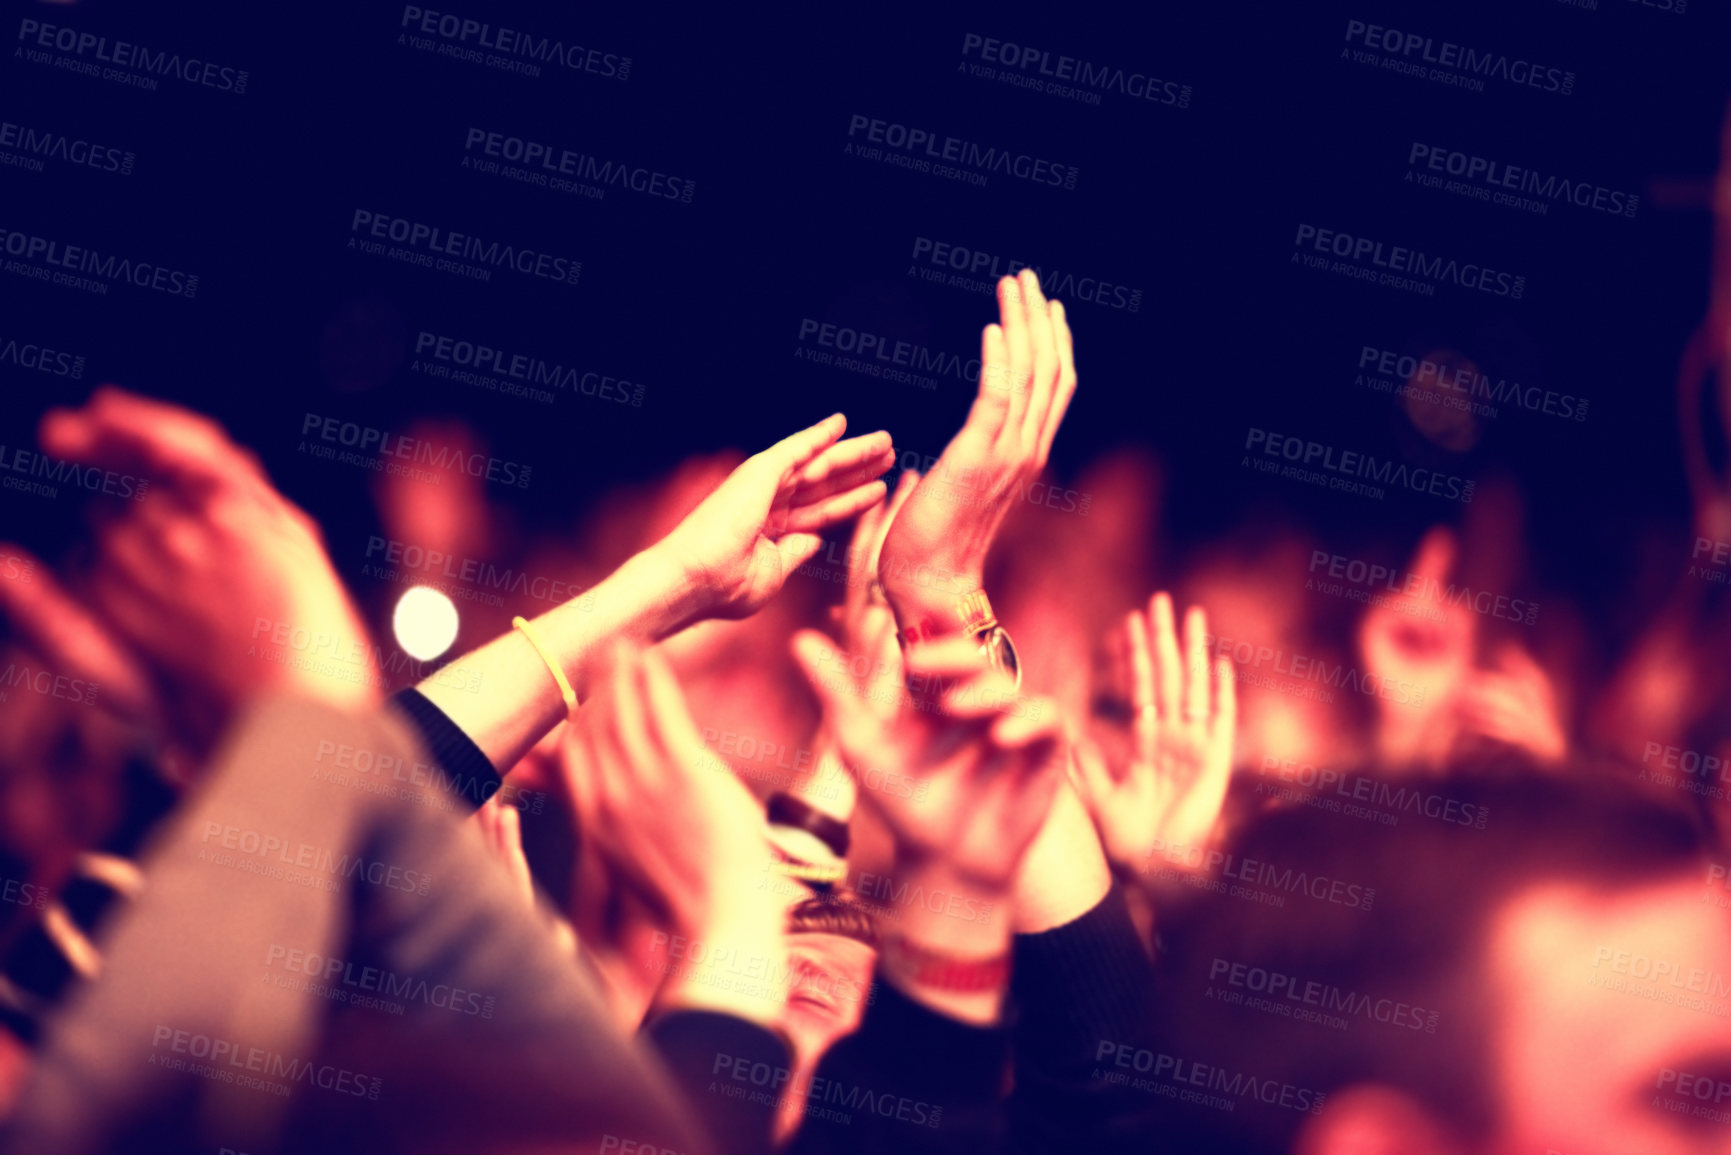 Buy stock photo An audience with hands  raised at an outdoors festival